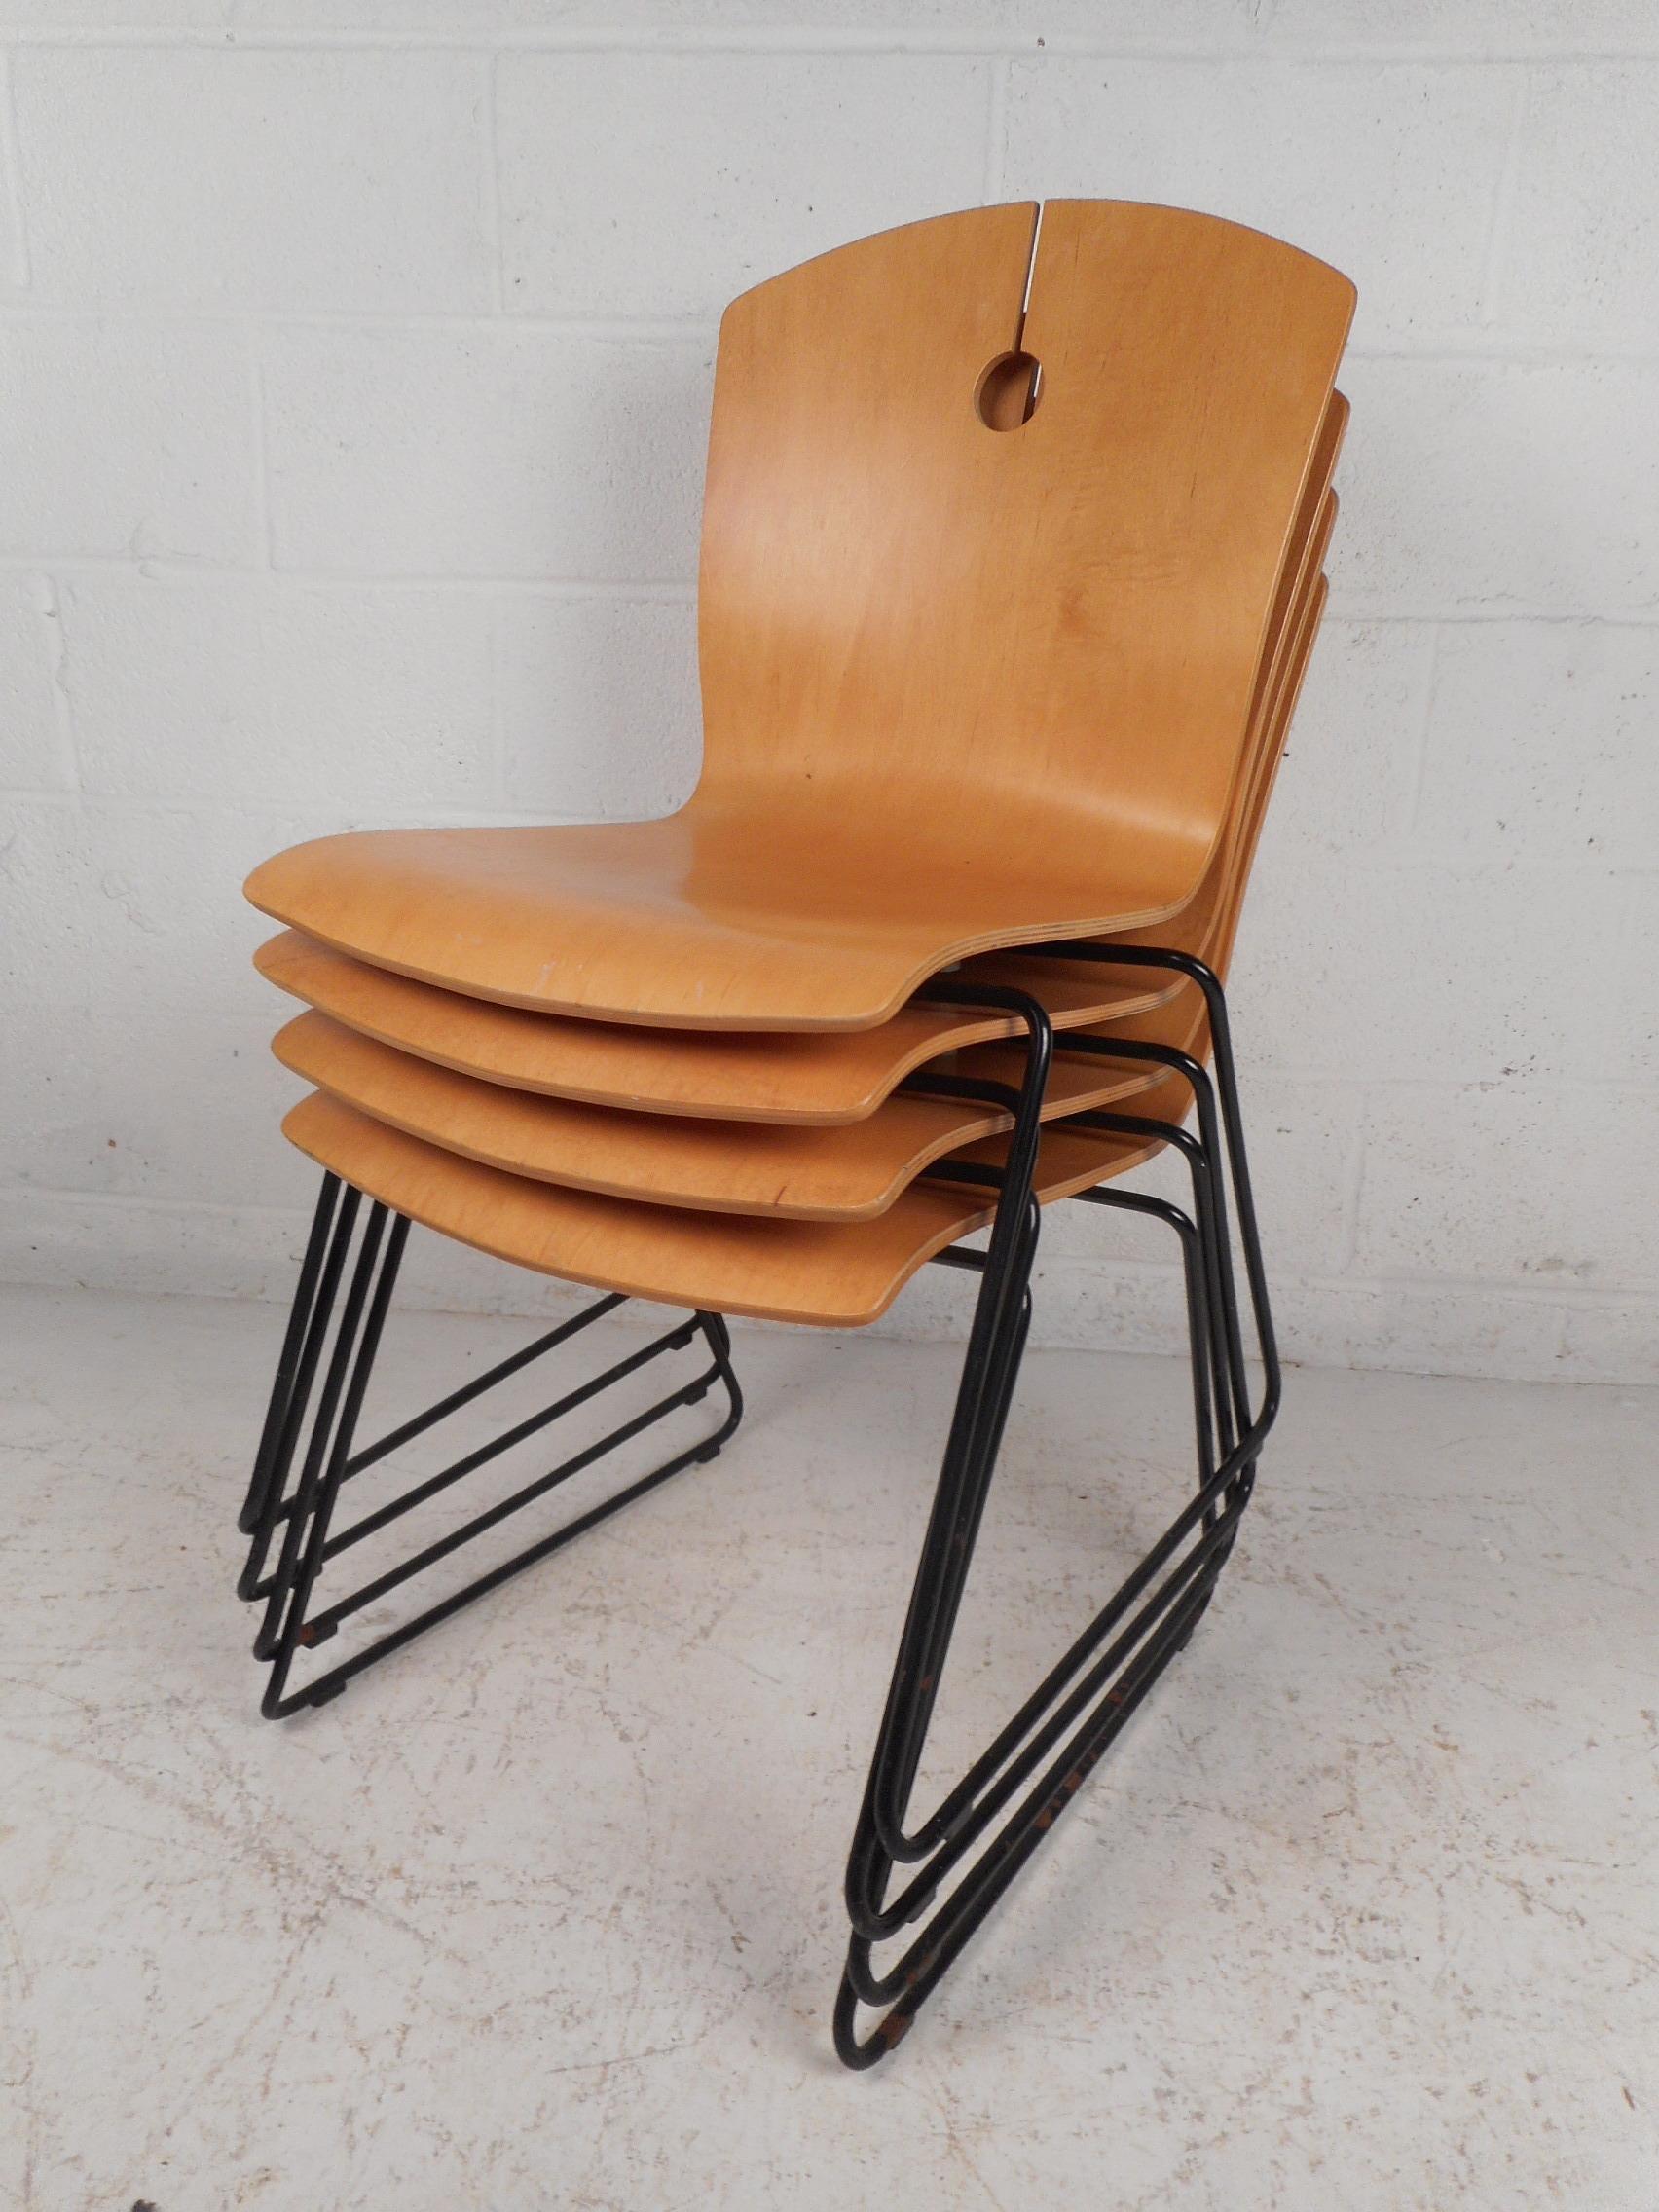 Sleek set of bentwood stacking chairs made by Wieland. Simple yet stylish design with a keyhole accent at the peak of the backrests. Supported by metal frames. Dynamic seating solution, easy to store when not in use. Sure to please in any modern